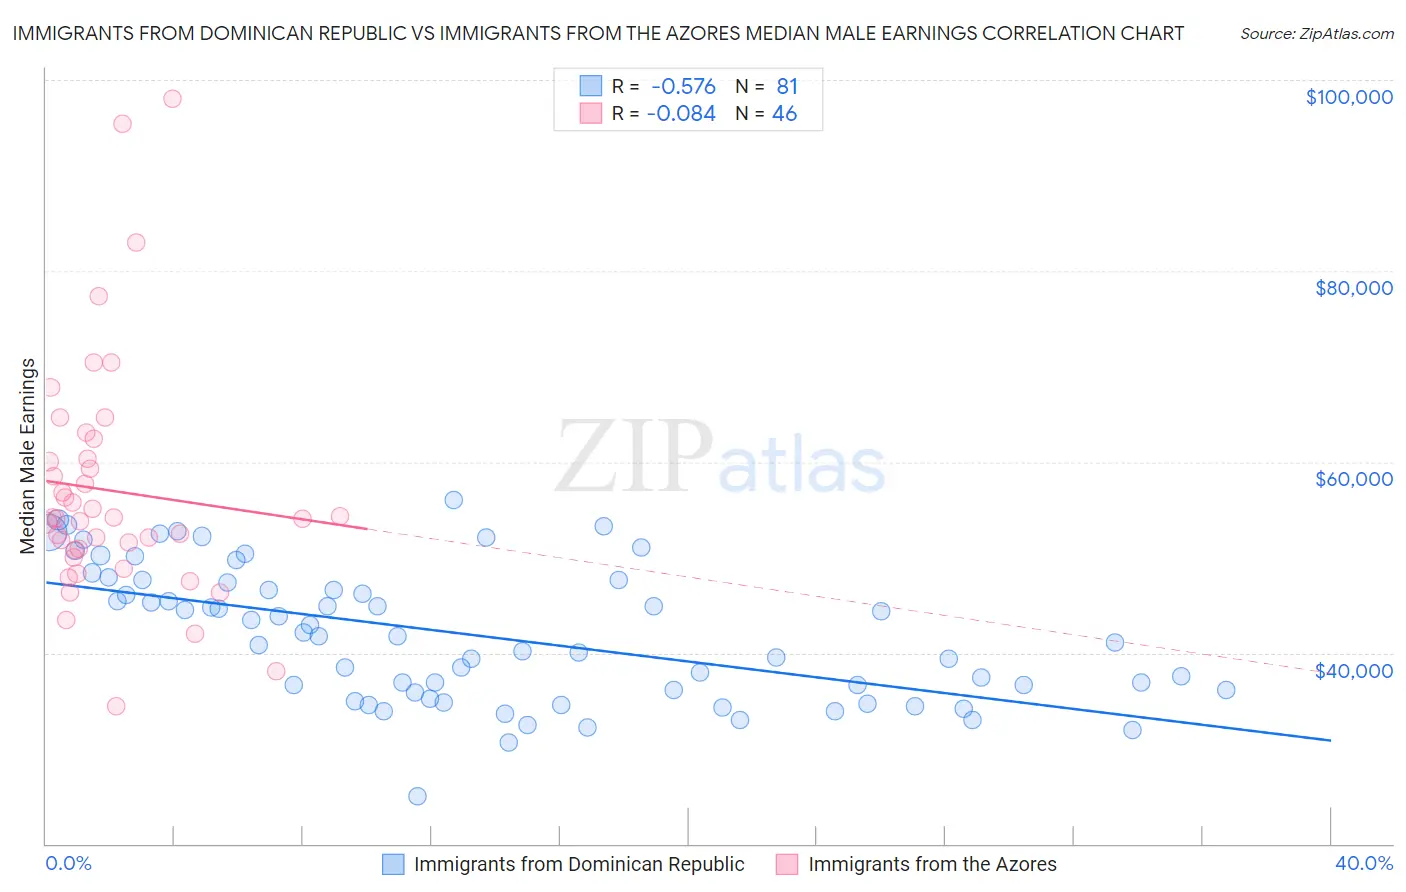 Immigrants from Dominican Republic vs Immigrants from the Azores Median Male Earnings